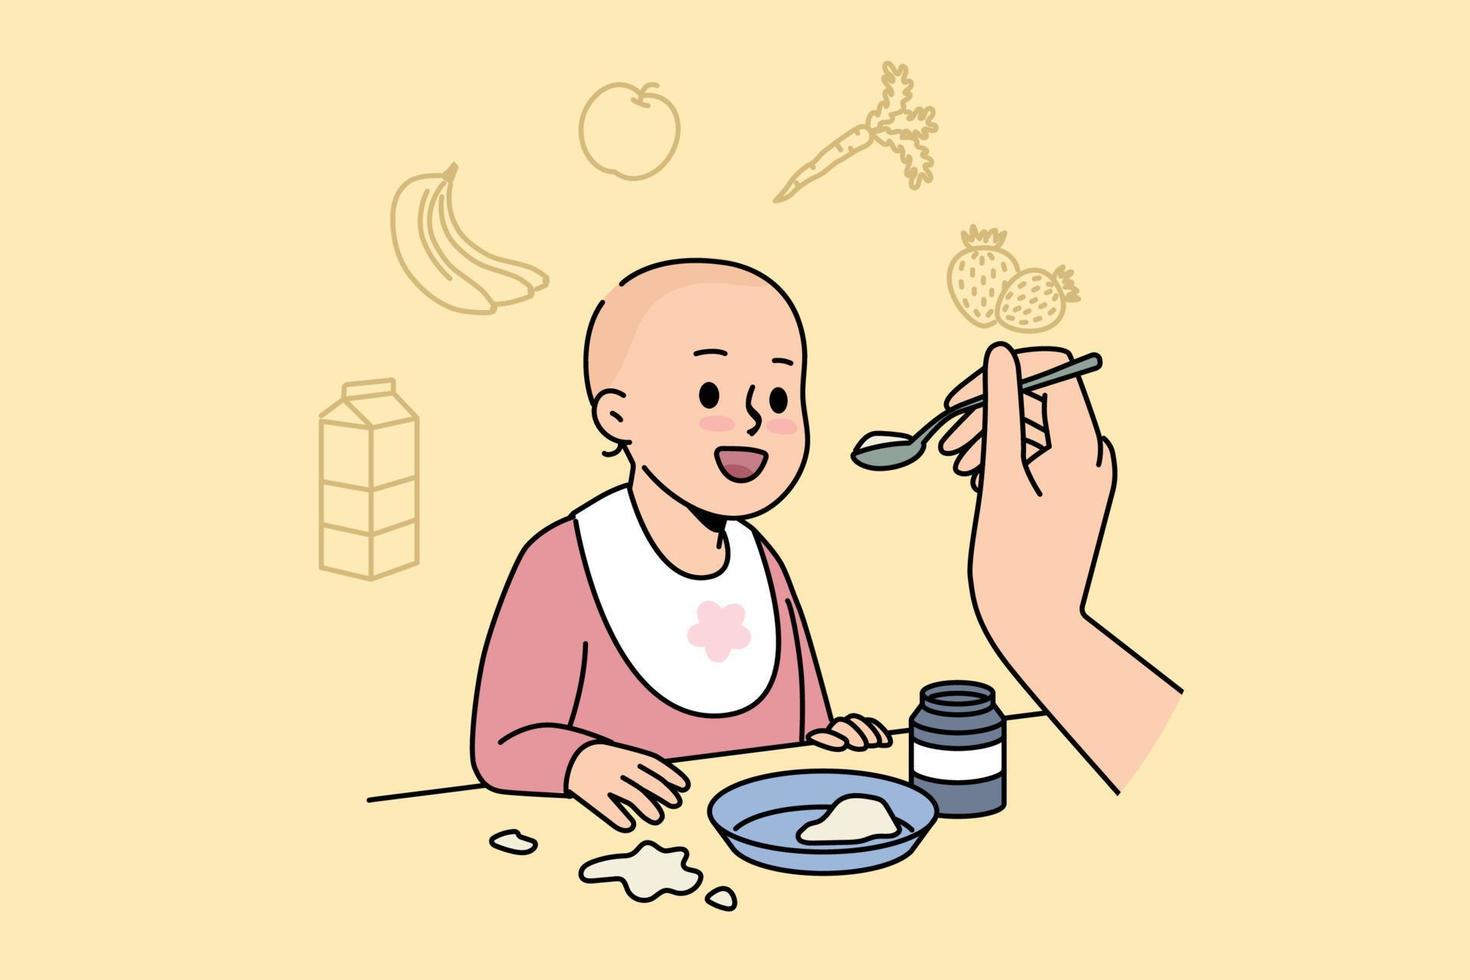 Cute baby getting feed by mom at home. Smiling toddler try new different food. Children eating habit. Vector illustration.